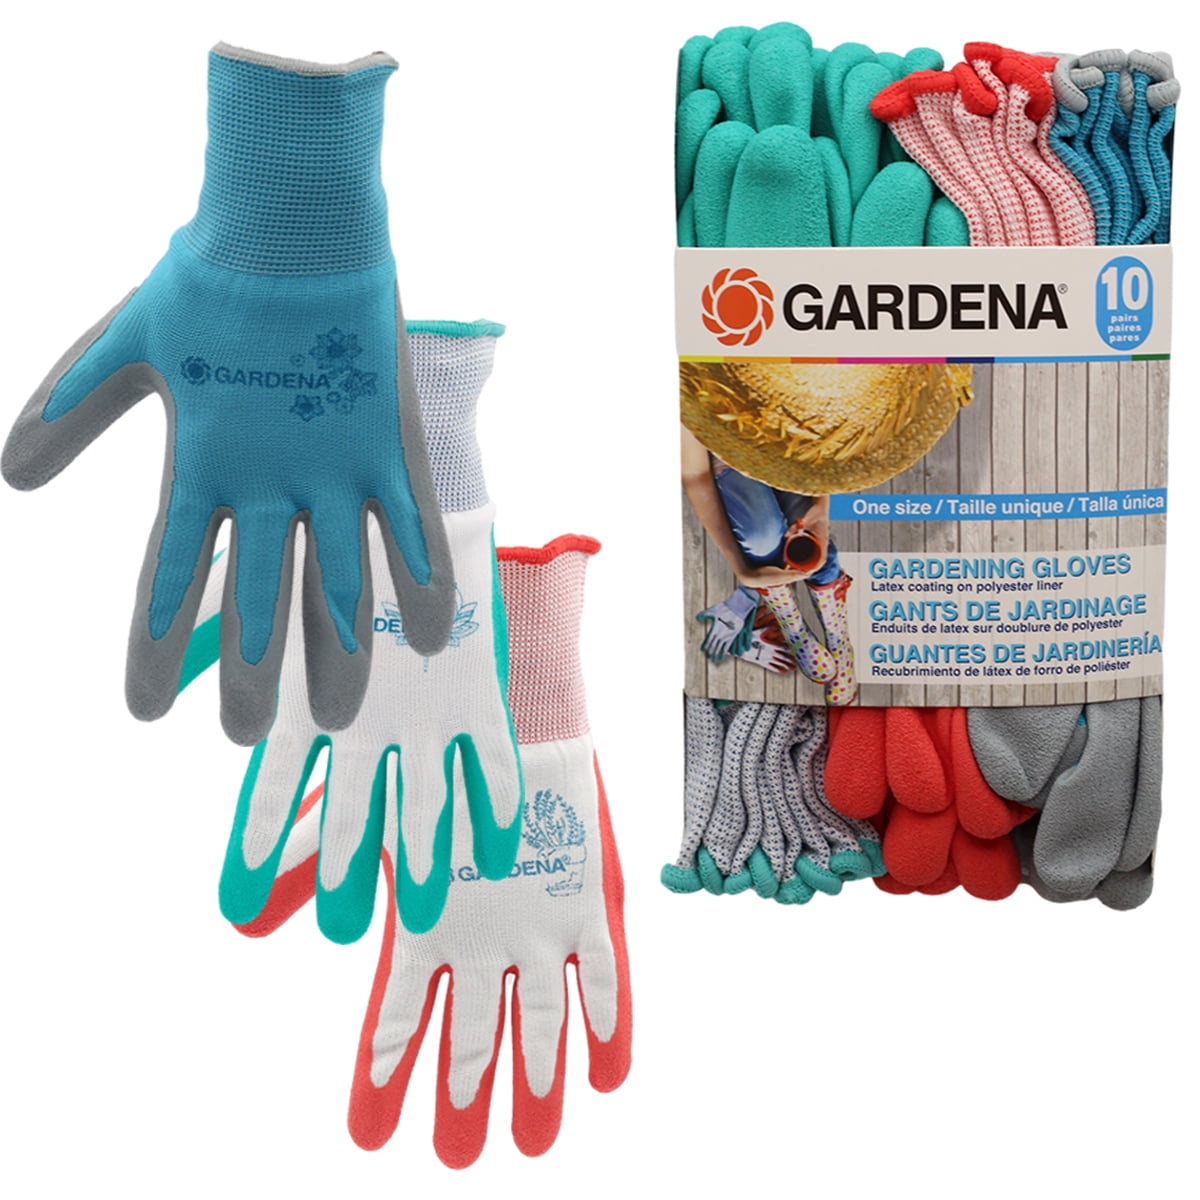 Gardena Gardening Gloves Latex Coating on Polyester Liner One Size 3 Pairs 